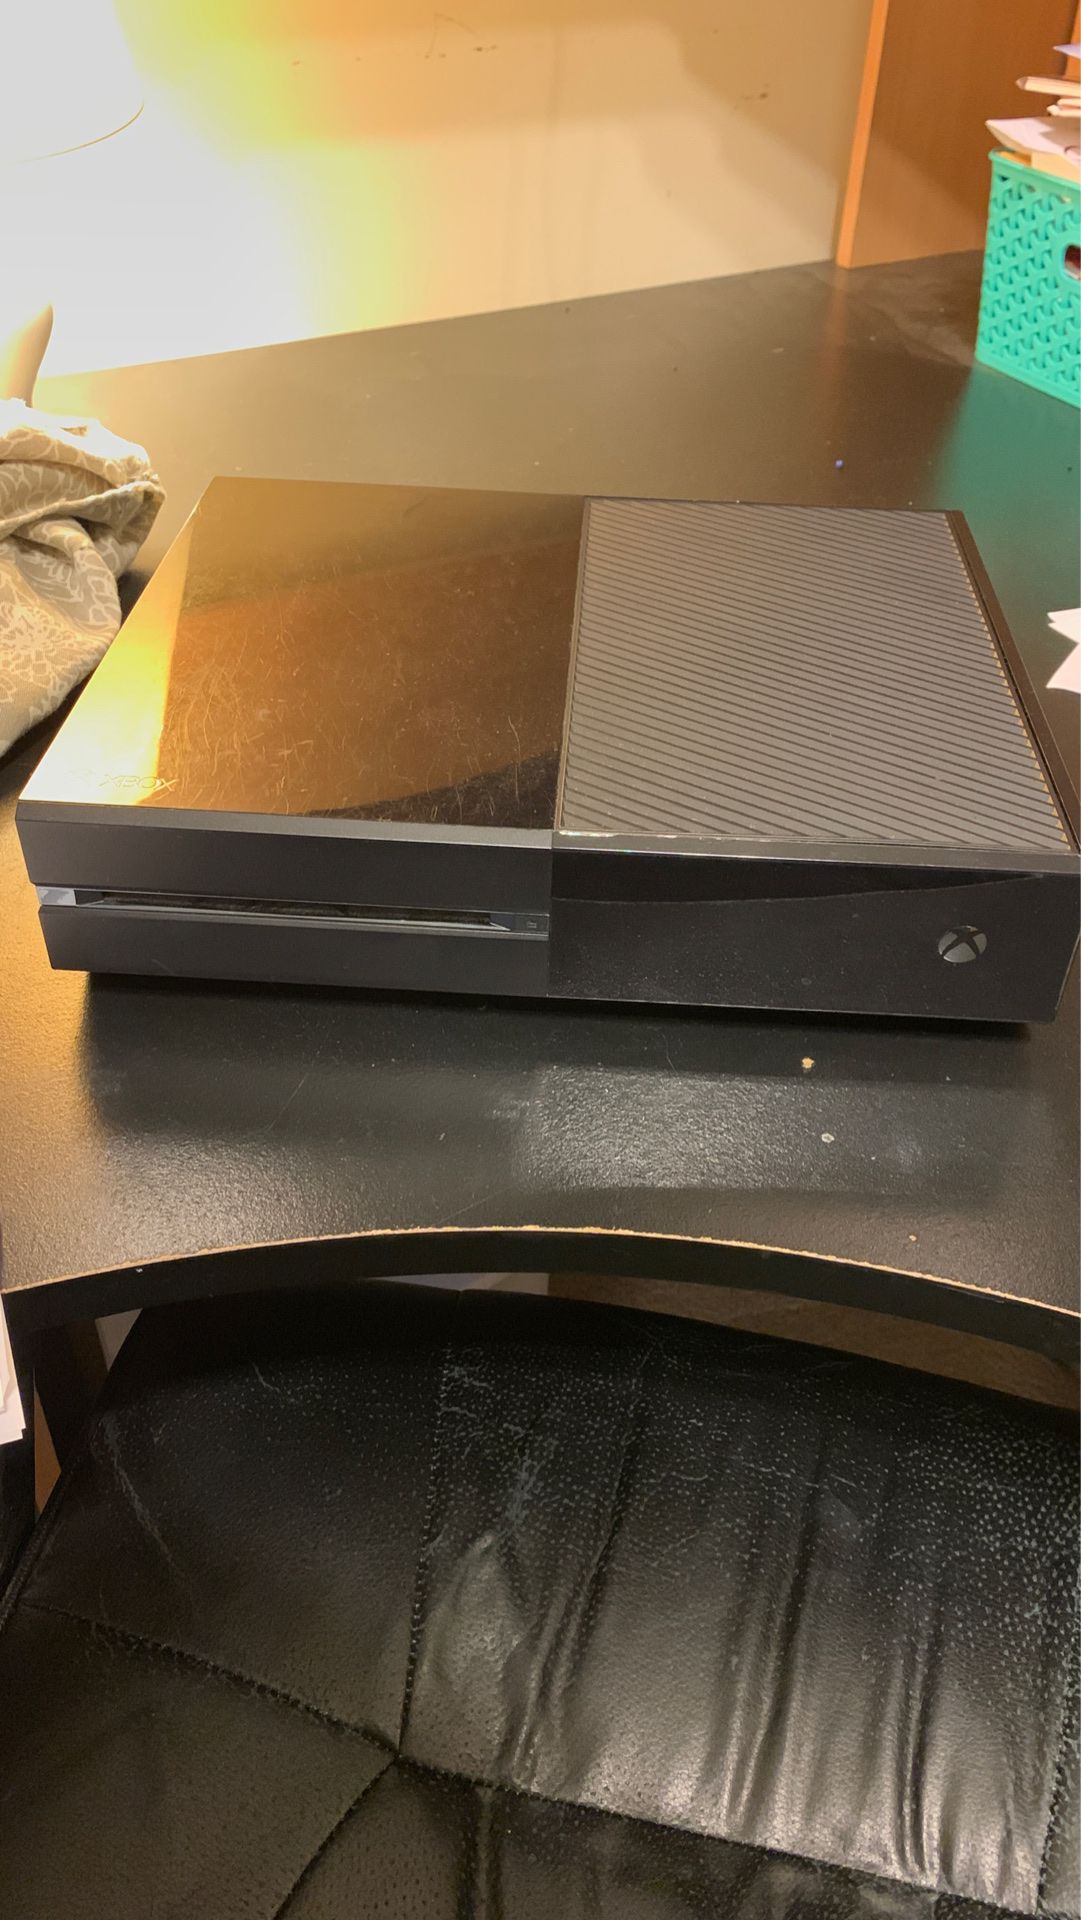 Very Nice Xbox One with Upgraded Hardrive